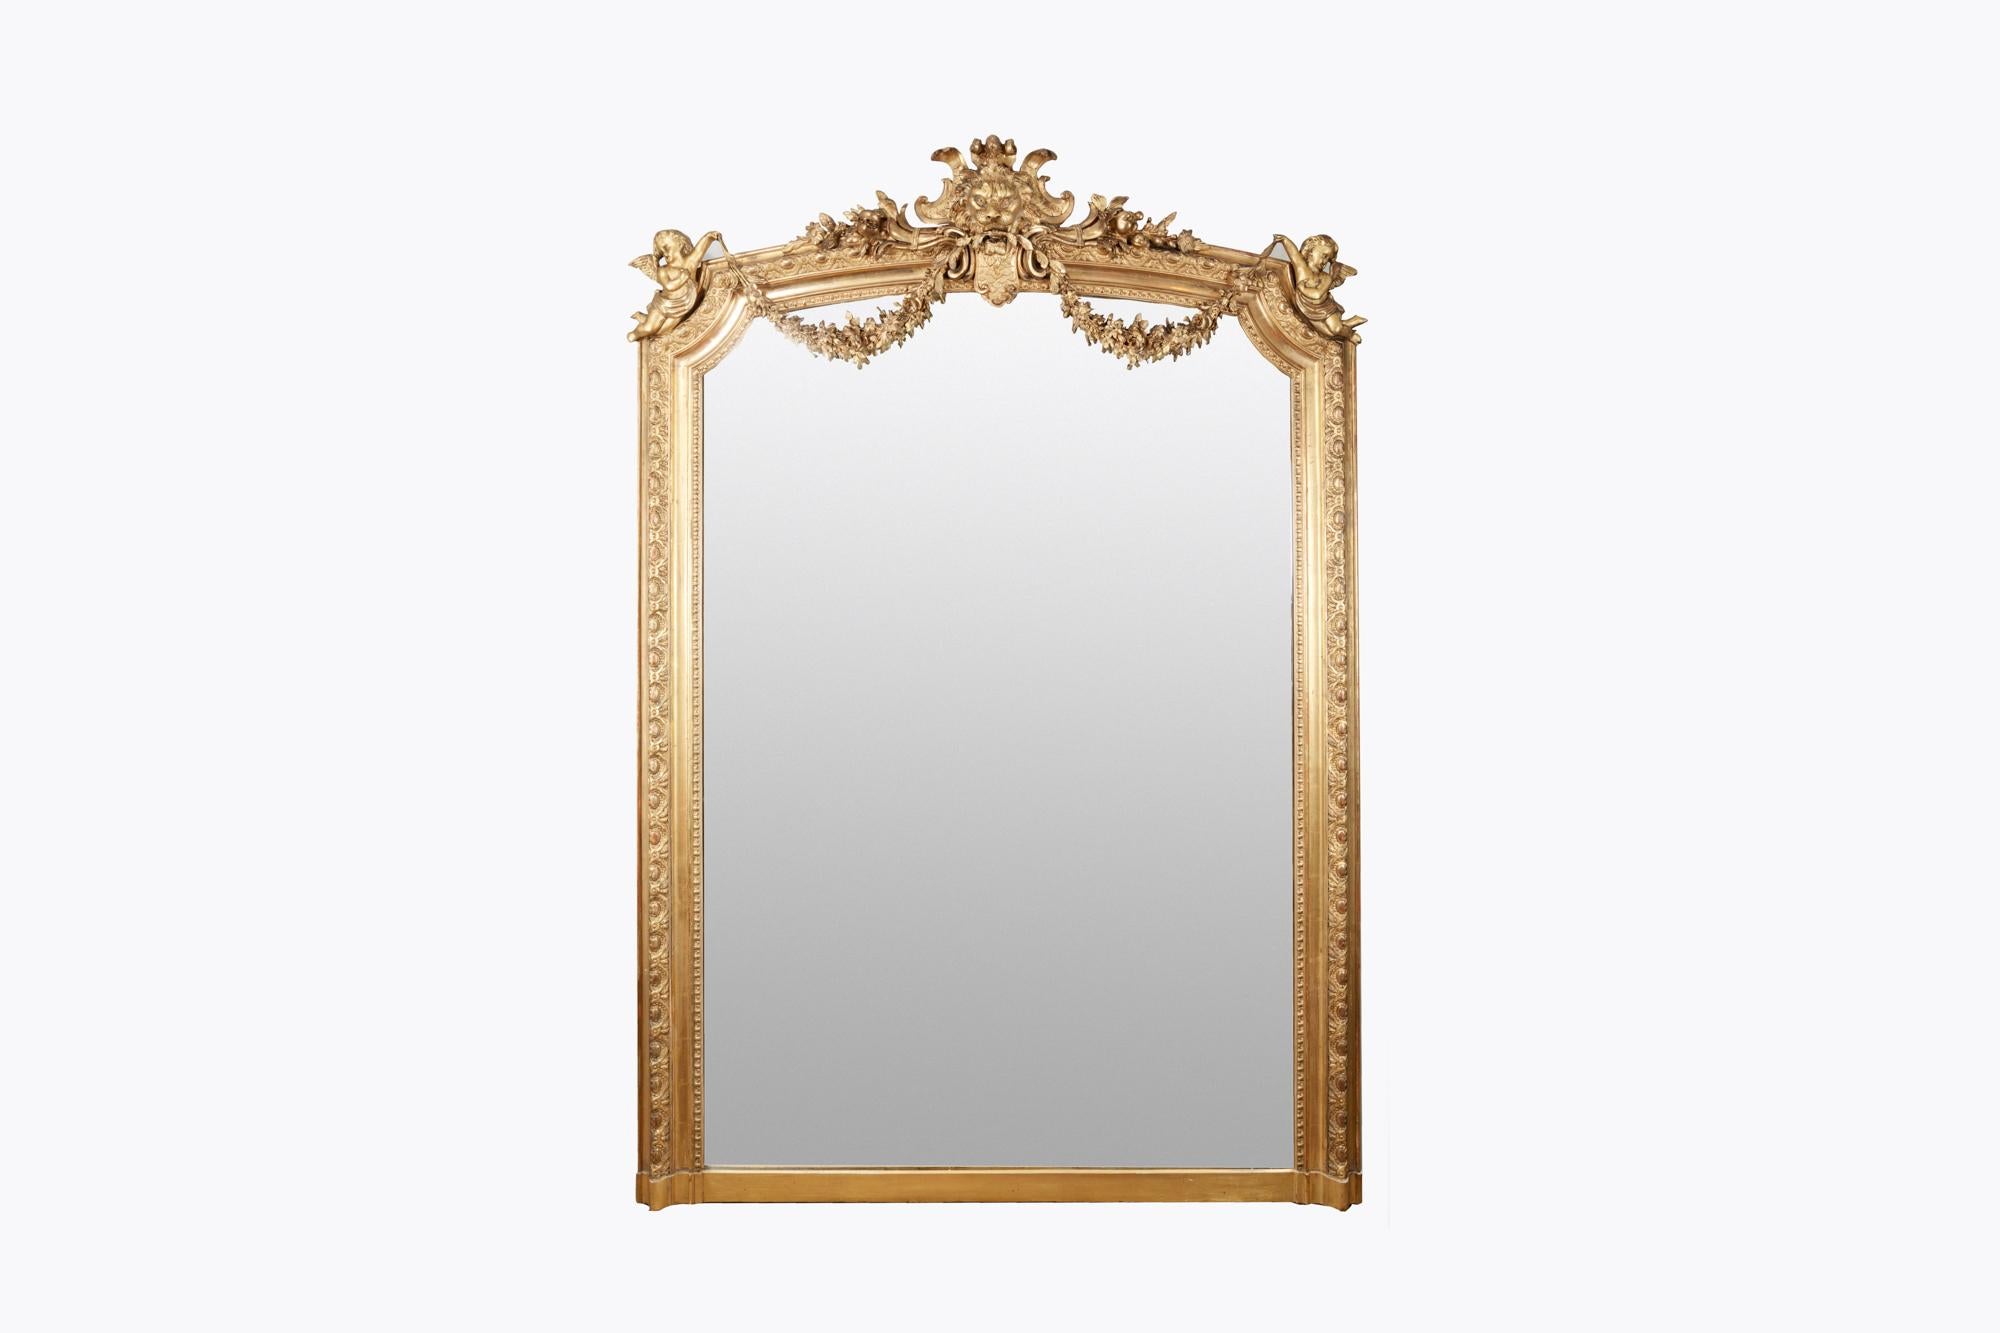 European Early 19th Century Gilt Overmantel Mirror After William Kent For Sale